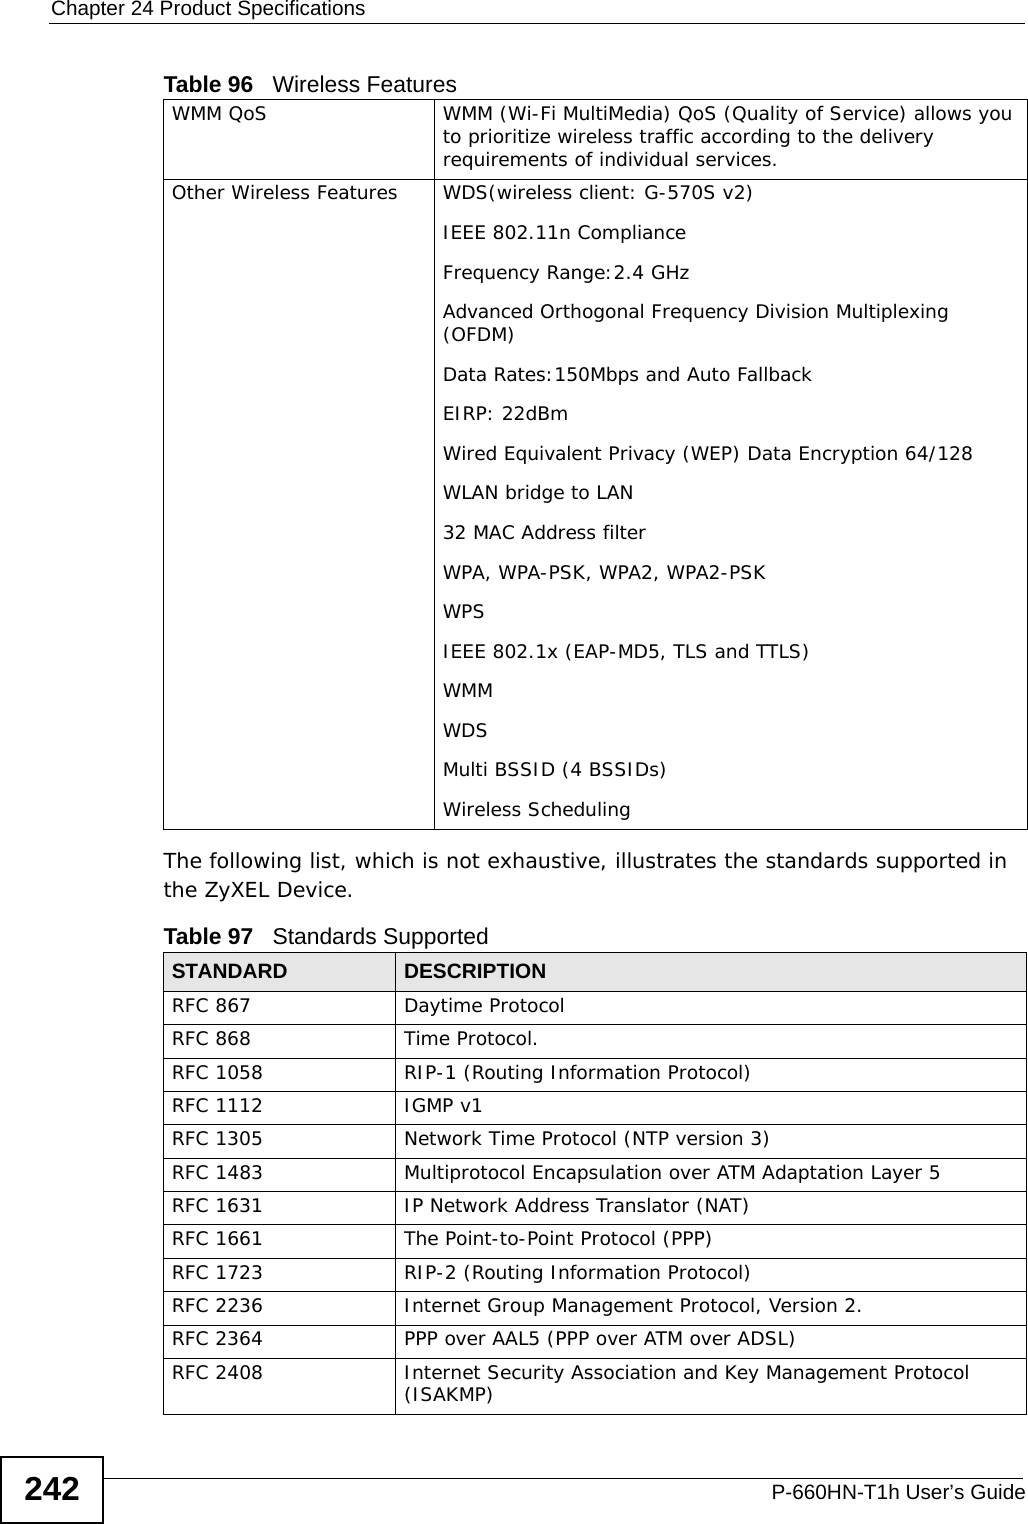 Chapter 24 Product SpecificationsP-660HN-T1h User’s Guide242The following list, which is not exhaustive, illustrates the standards supported in the ZyXEL Device.WMM QoS  WMM (Wi-Fi MultiMedia) QoS (Quality of Service) allows you to prioritize wireless traffic according to the delivery requirements of individual services.Other Wireless Features WDS(wireless client: G-570S v2)IEEE 802.11n ComplianceFrequency Range:2.4 GHzAdvanced Orthogonal Frequency Division Multiplexing (OFDM)Data Rates:150Mbps and Auto FallbackEIRP: 22dBmWired Equivalent Privacy (WEP) Data Encryption 64/128WLAN bridge to LAN32 MAC Address filterWPA, WPA-PSK, WPA2, WPA2-PSKWPSIEEE 802.1x (EAP-MD5, TLS and TTLS)WMMWDSMulti BSSID (4 BSSIDs)Wireless SchedulingTable 97   Standards Supported STANDARD DESCRIPTIONRFC 867 Daytime ProtocolRFC 868 Time Protocol.RFC 1058 RIP-1 (Routing Information Protocol)RFC 1112 IGMP v1RFC 1305 Network Time Protocol (NTP version 3)RFC 1483 Multiprotocol Encapsulation over ATM Adaptation Layer 5RFC 1631 IP Network Address Translator (NAT)RFC 1661 The Point-to-Point Protocol (PPP)RFC 1723 RIP-2 (Routing Information Protocol)RFC 2236 Internet Group Management Protocol, Version 2.RFC 2364 PPP over AAL5 (PPP over ATM over ADSL)RFC 2408 Internet Security Association and Key Management Protocol (ISAKMP)Table 96   Wireless Features